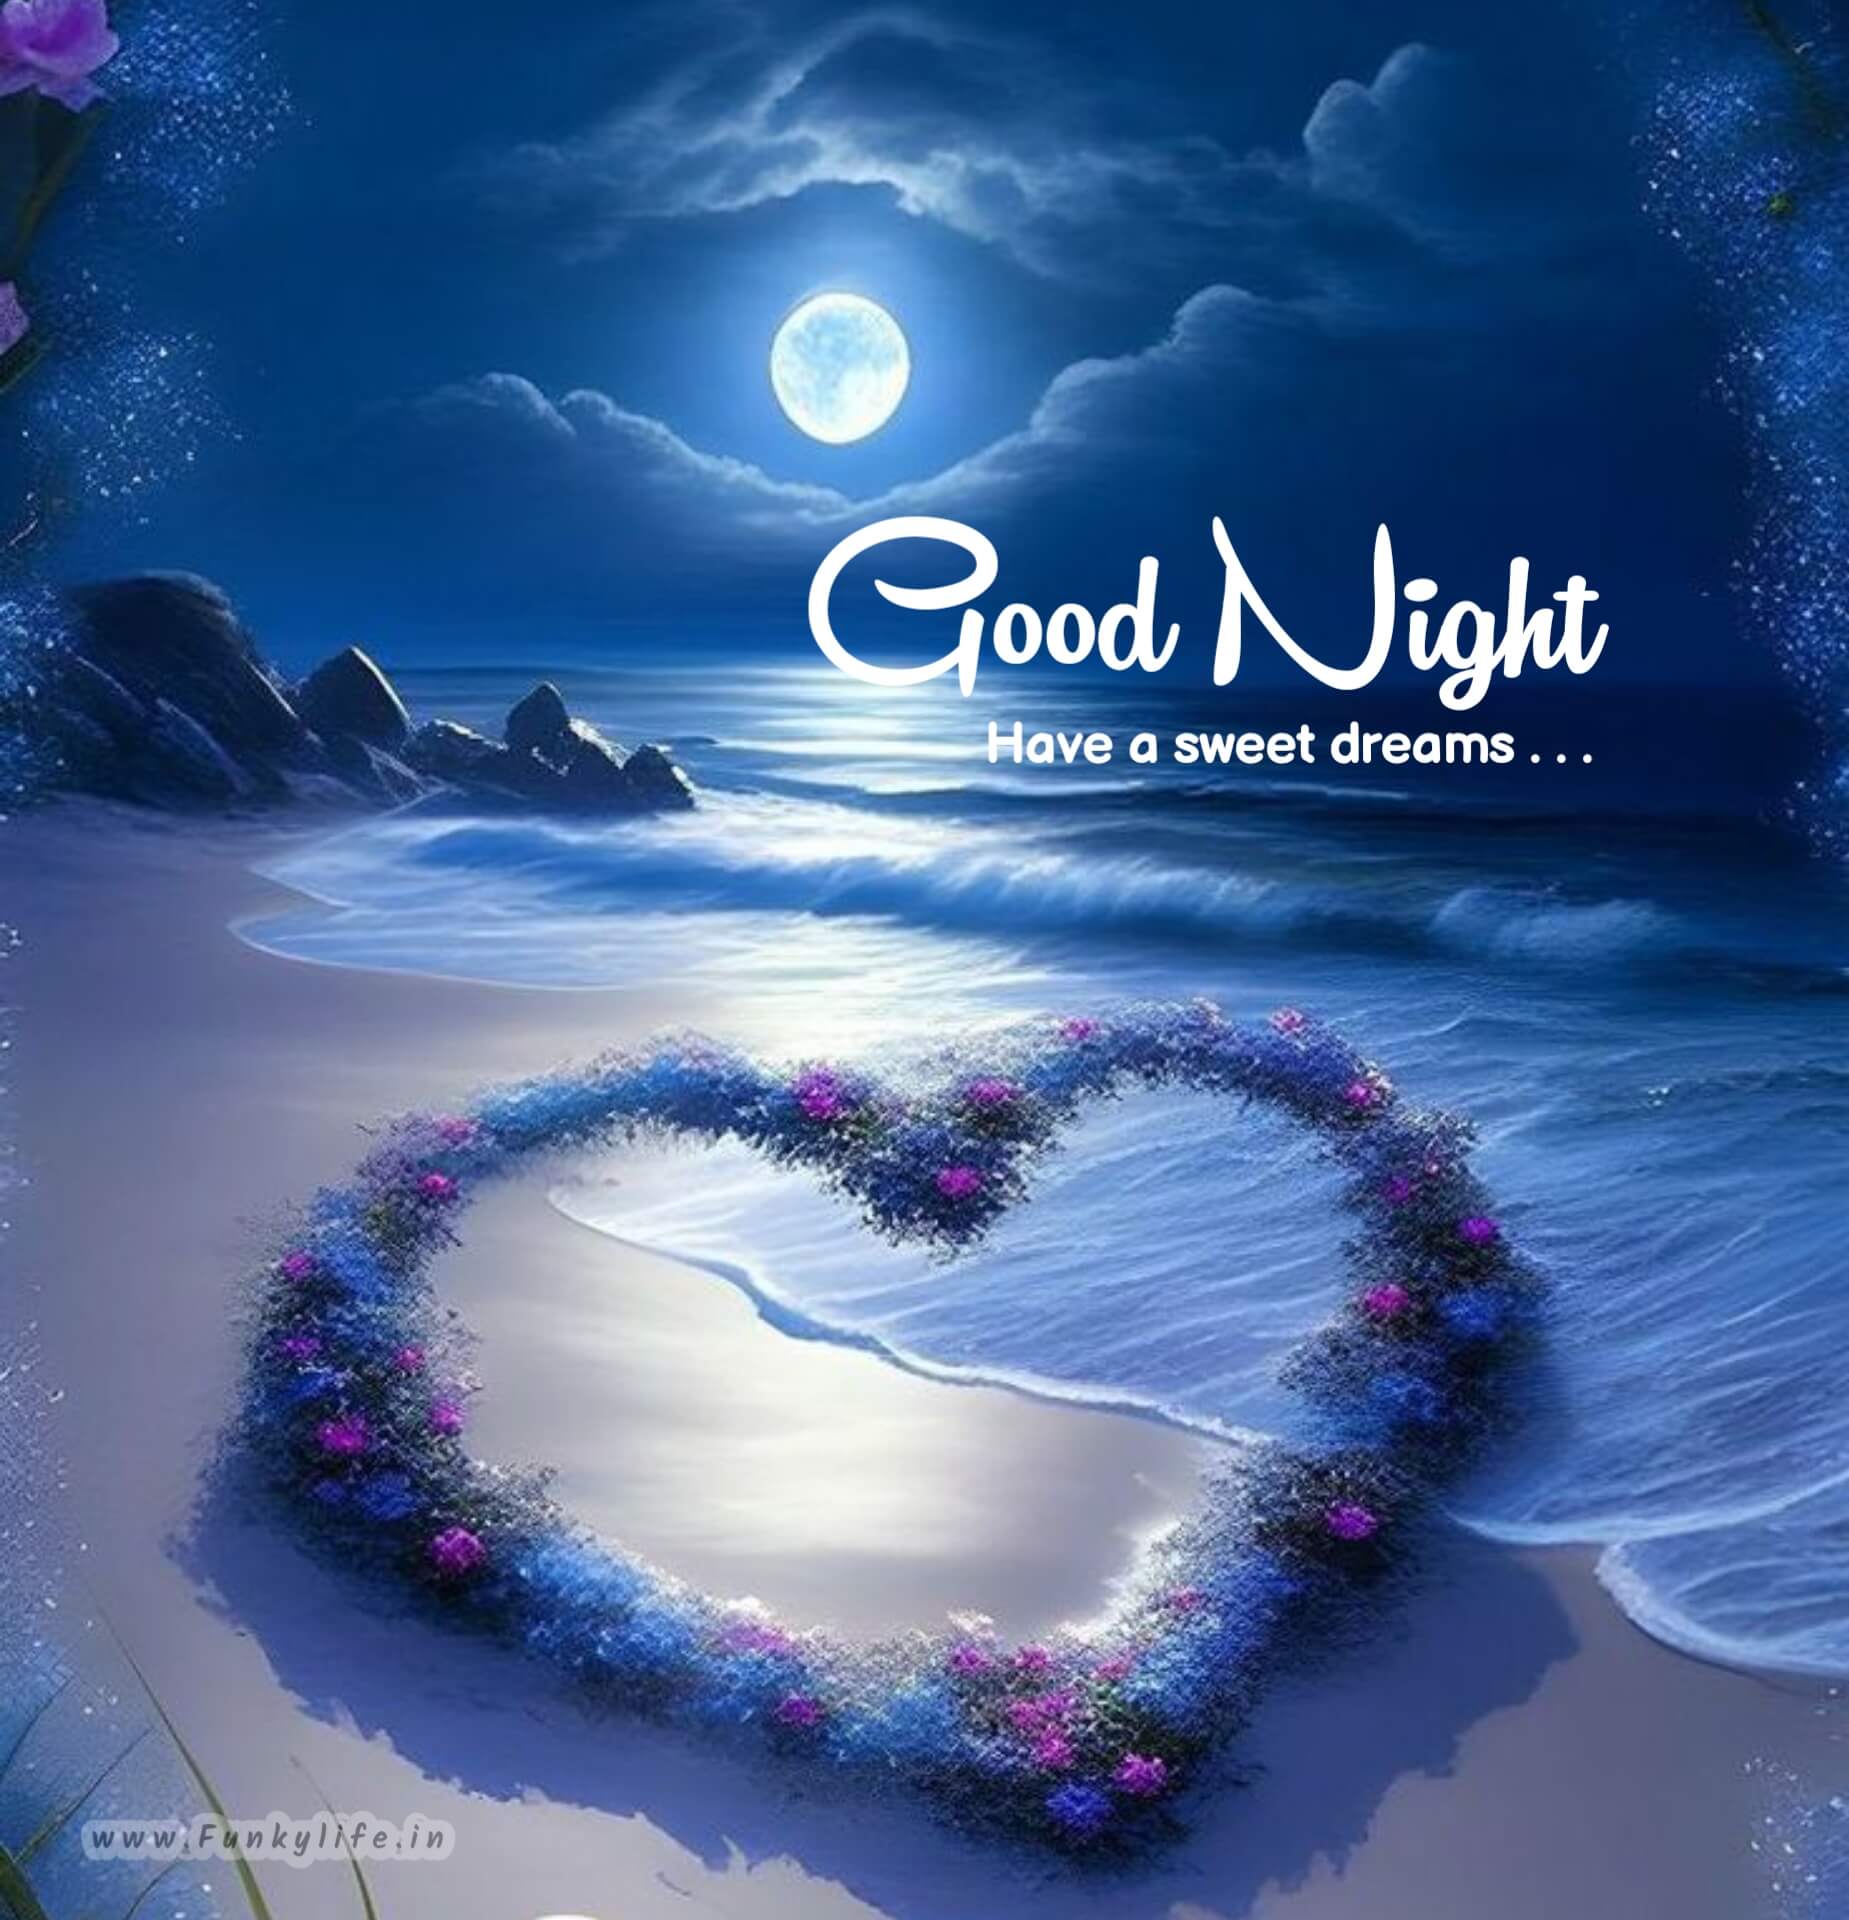 Share more than 77 good night special wallpaper